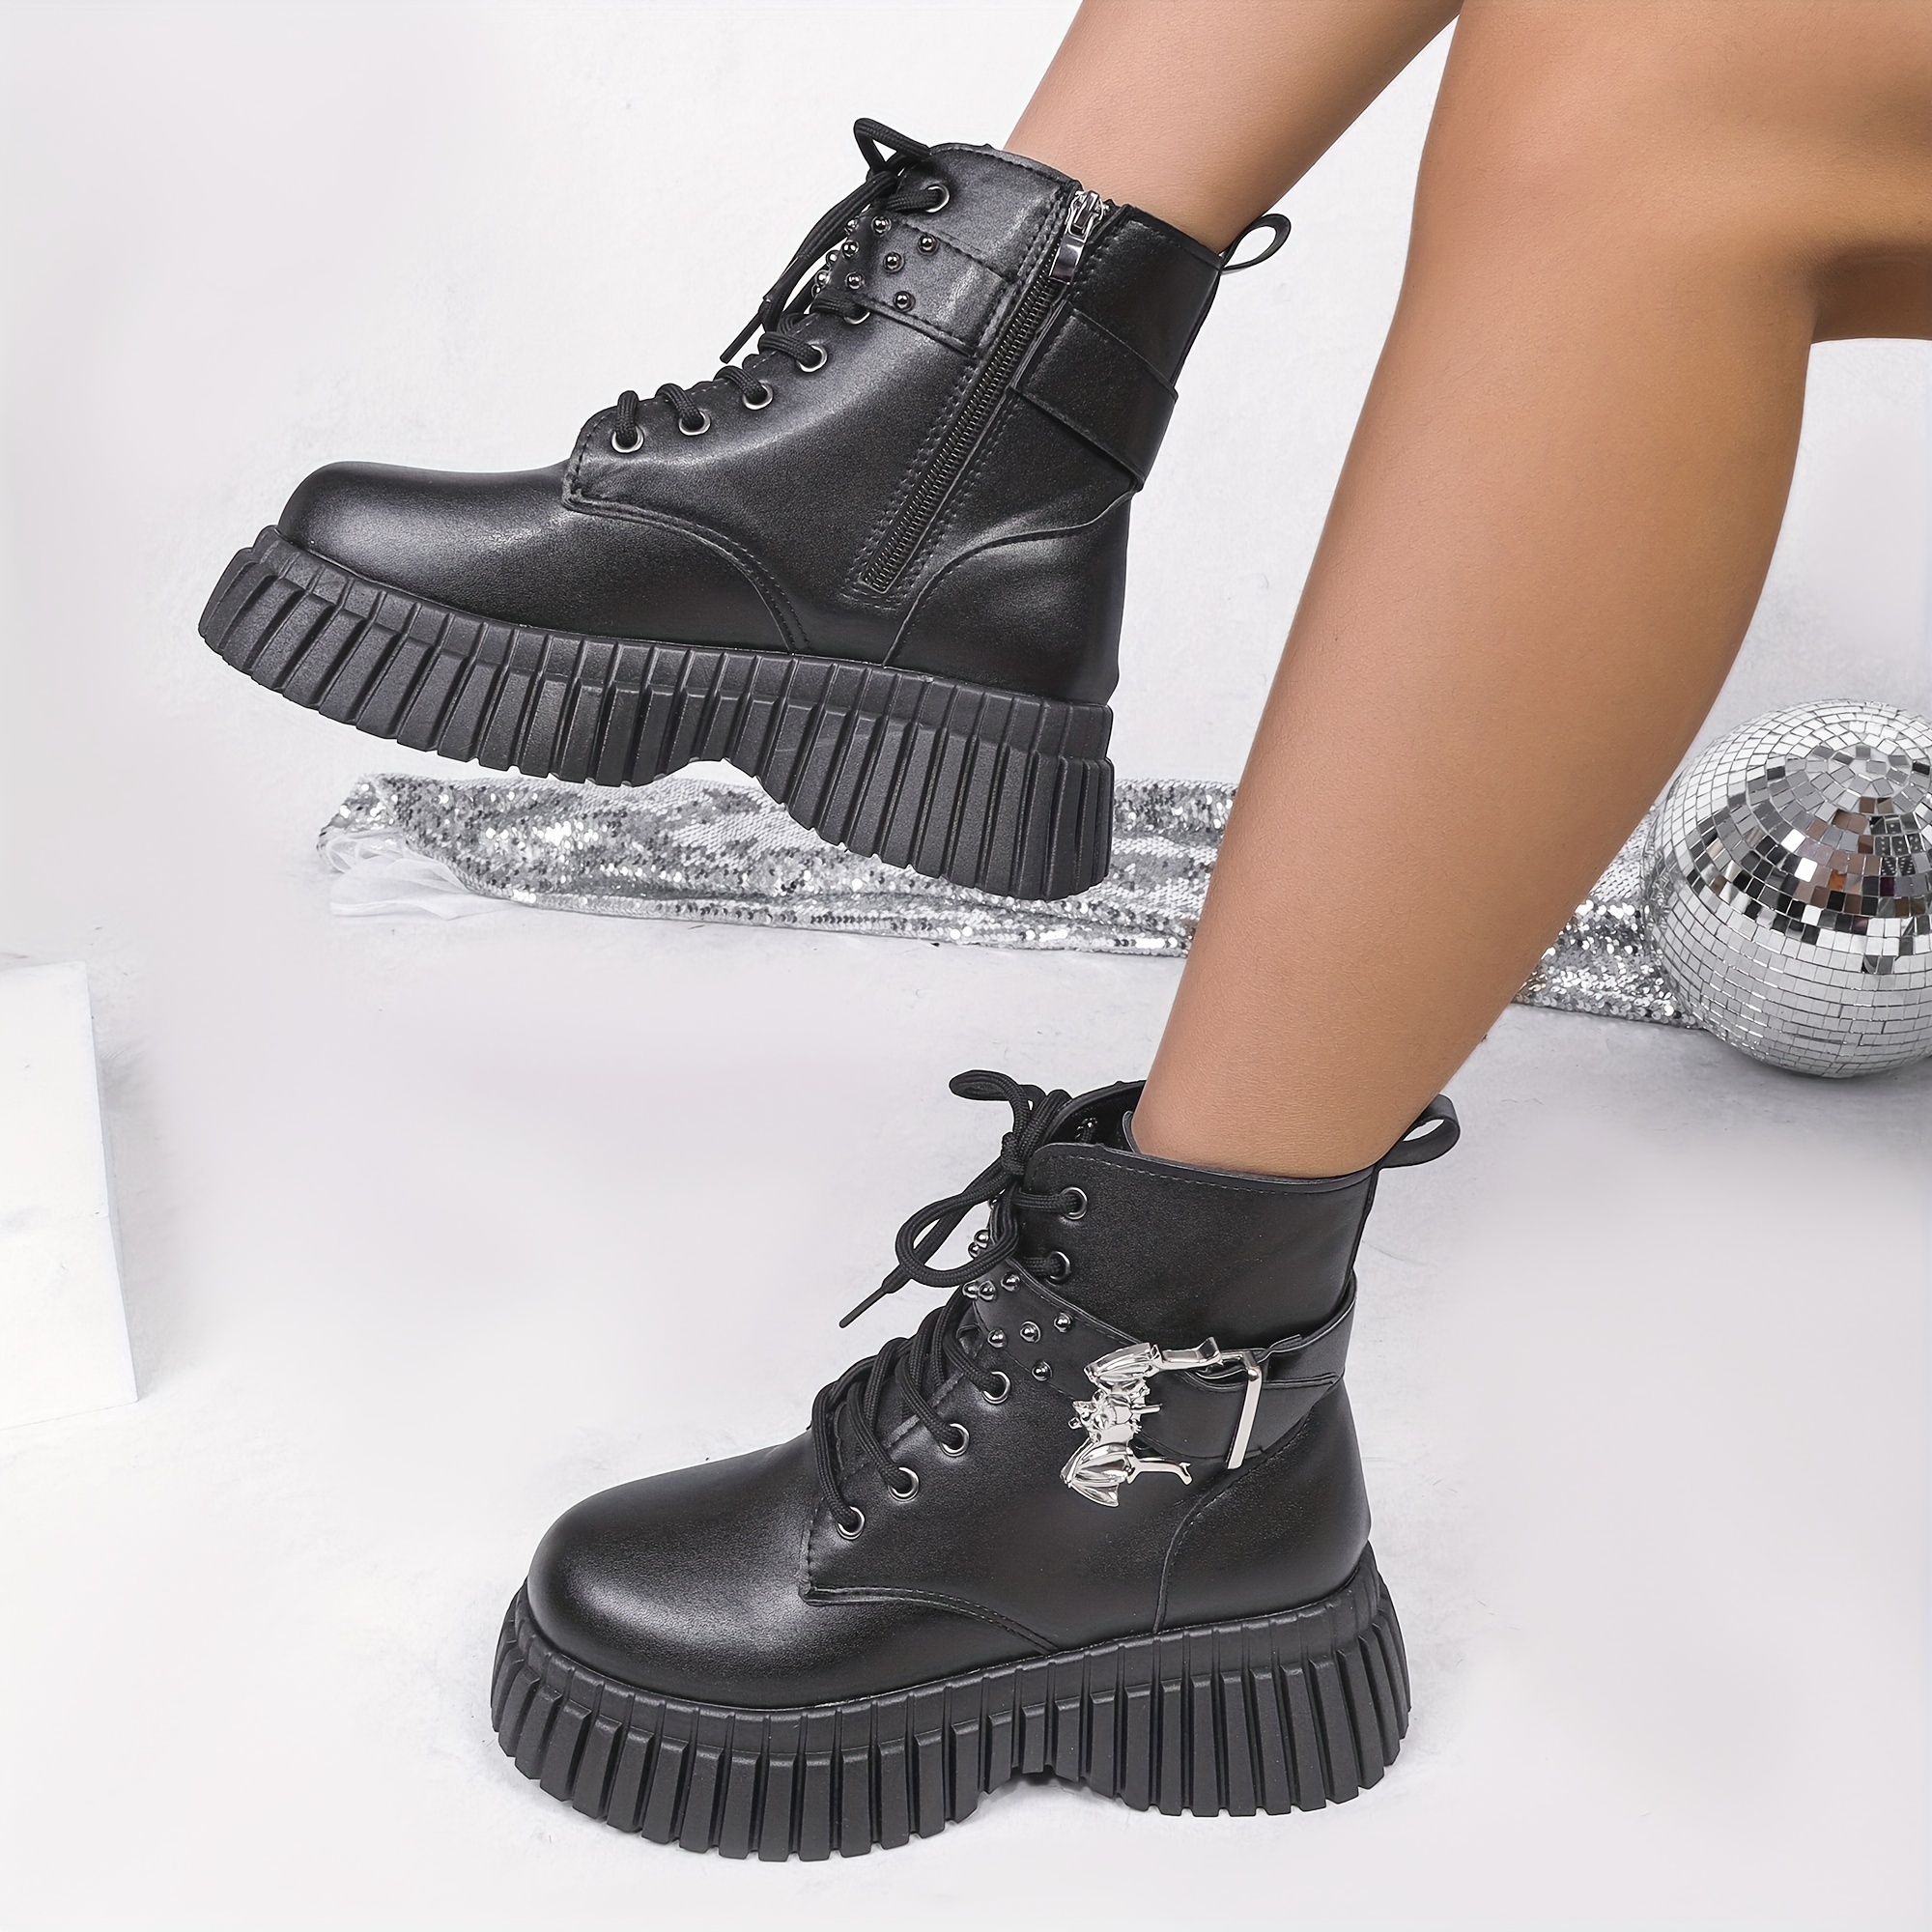 Ladies Lace UP Punk Gothic Rock High Platform Creepers Shoes Ankle